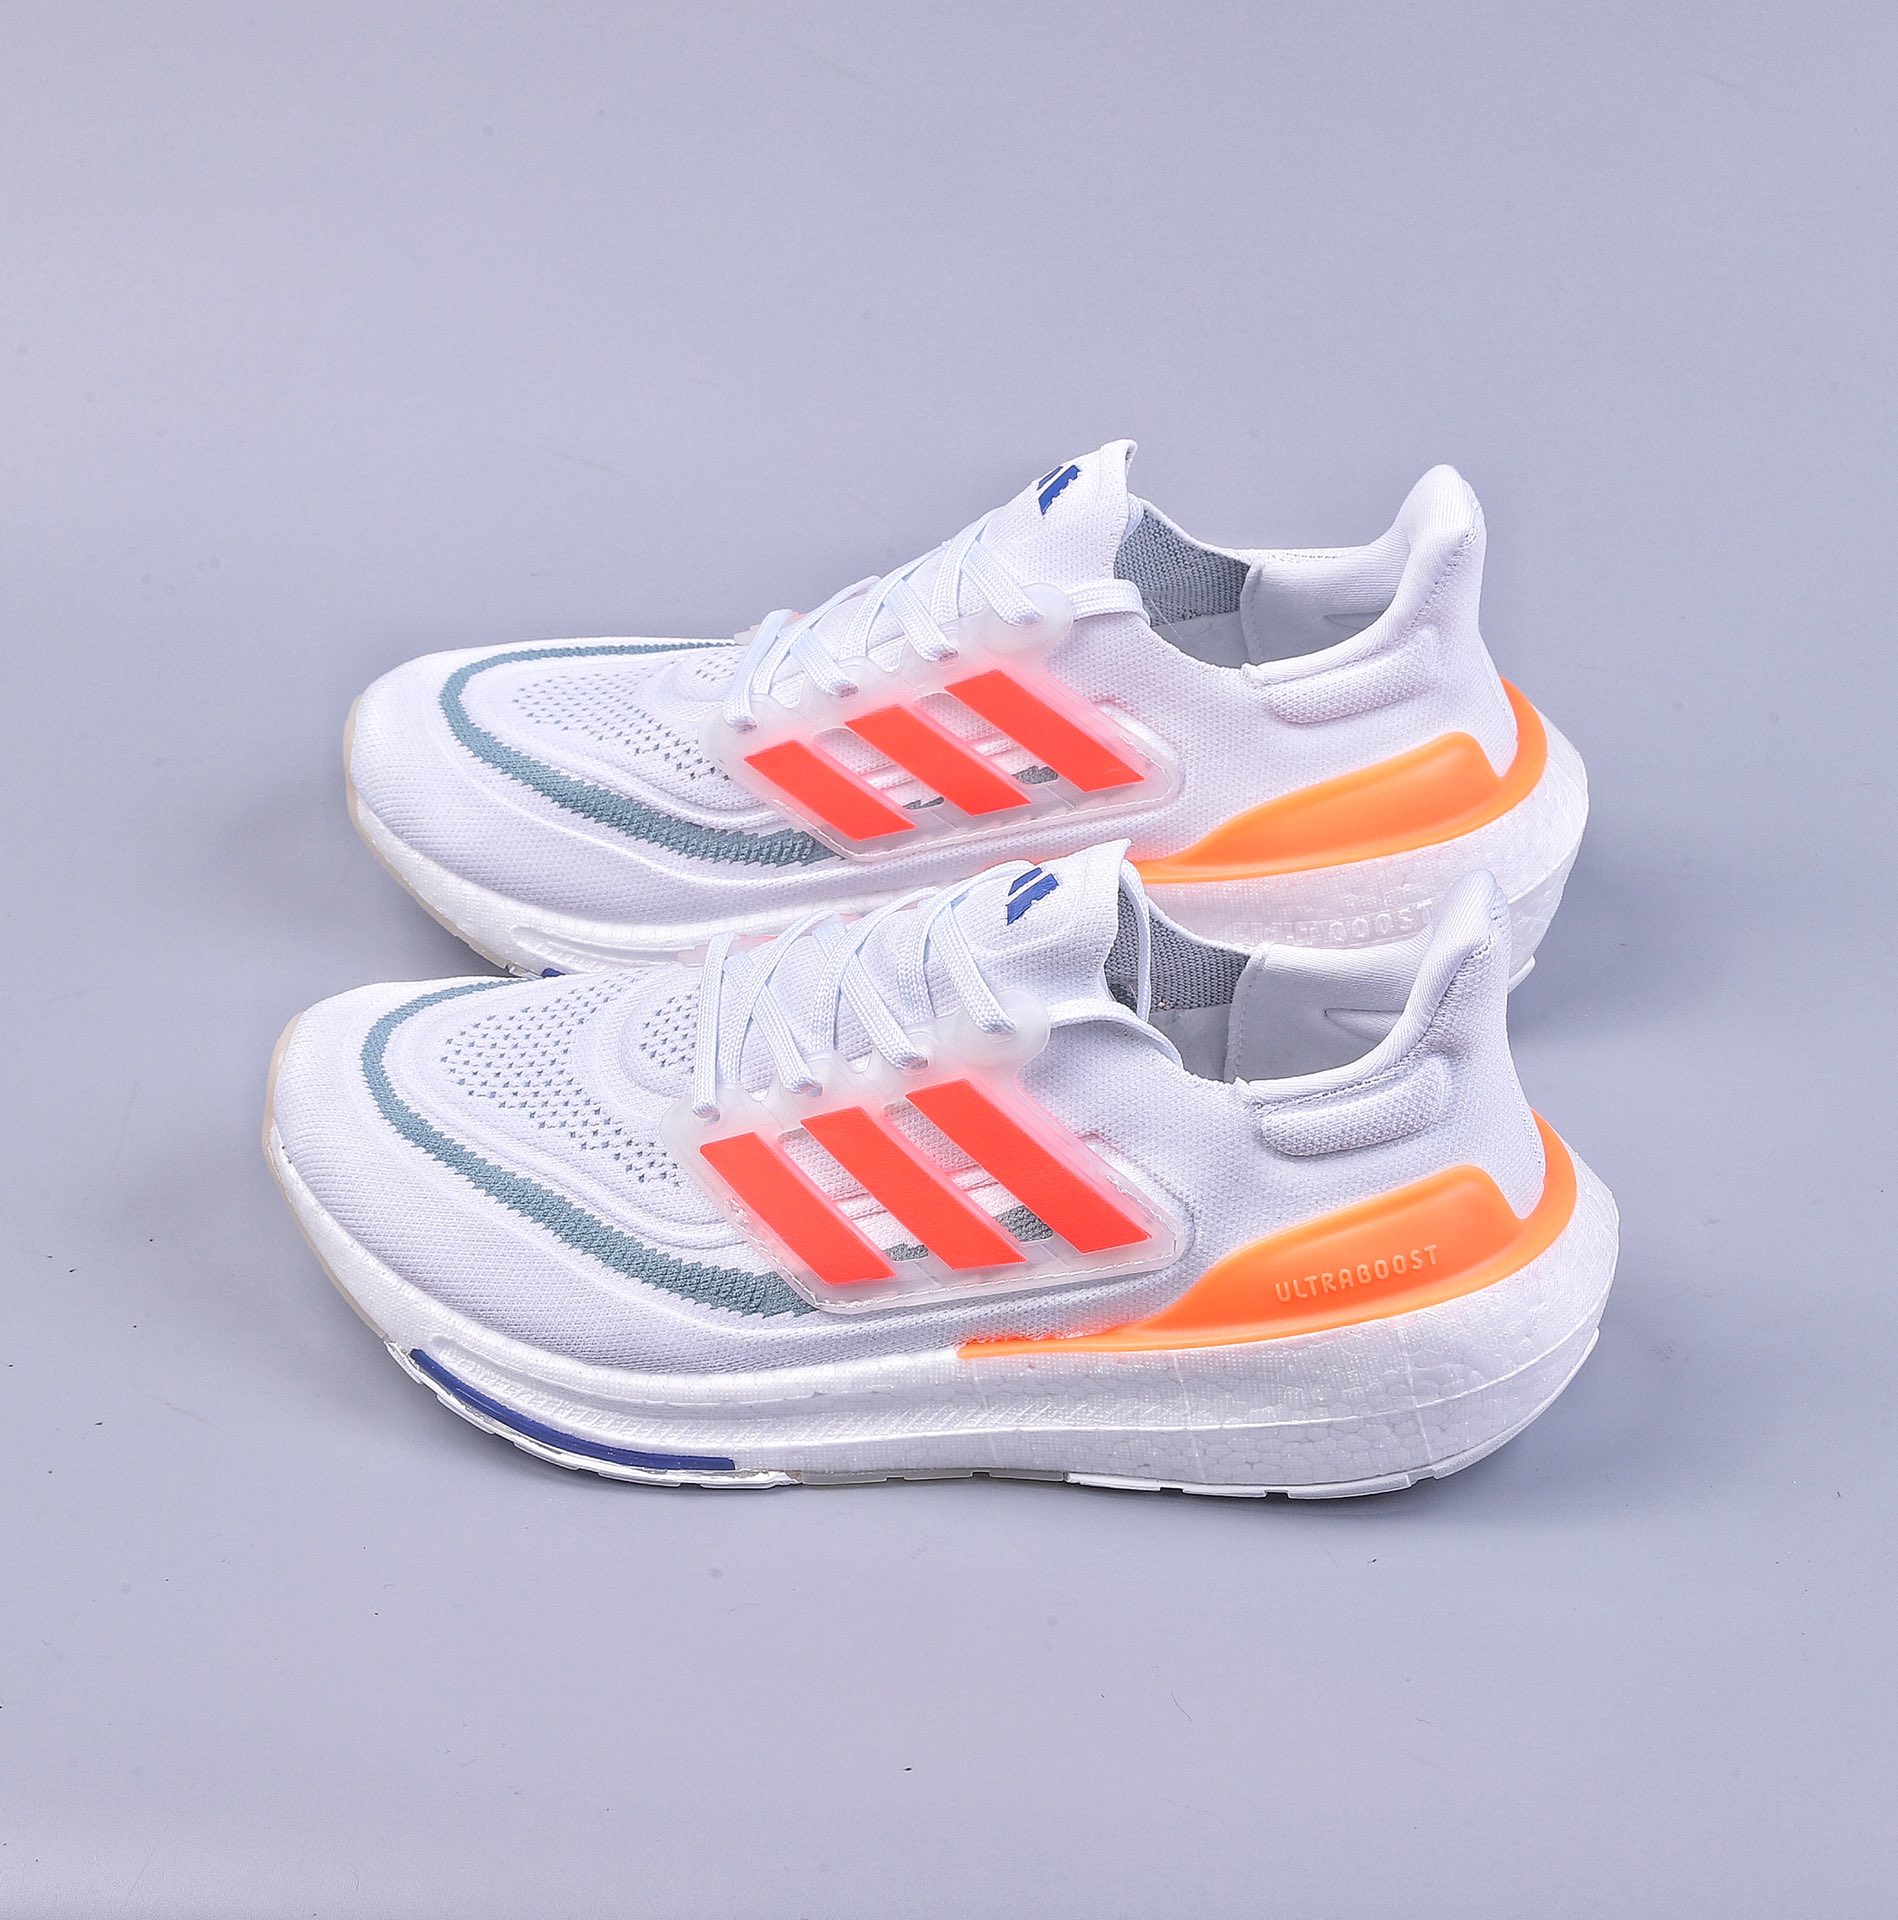 Adidas Ultra Boost Light 23 HS6344 New UB9.0 light-bounce thick-soled popcorn running shoes